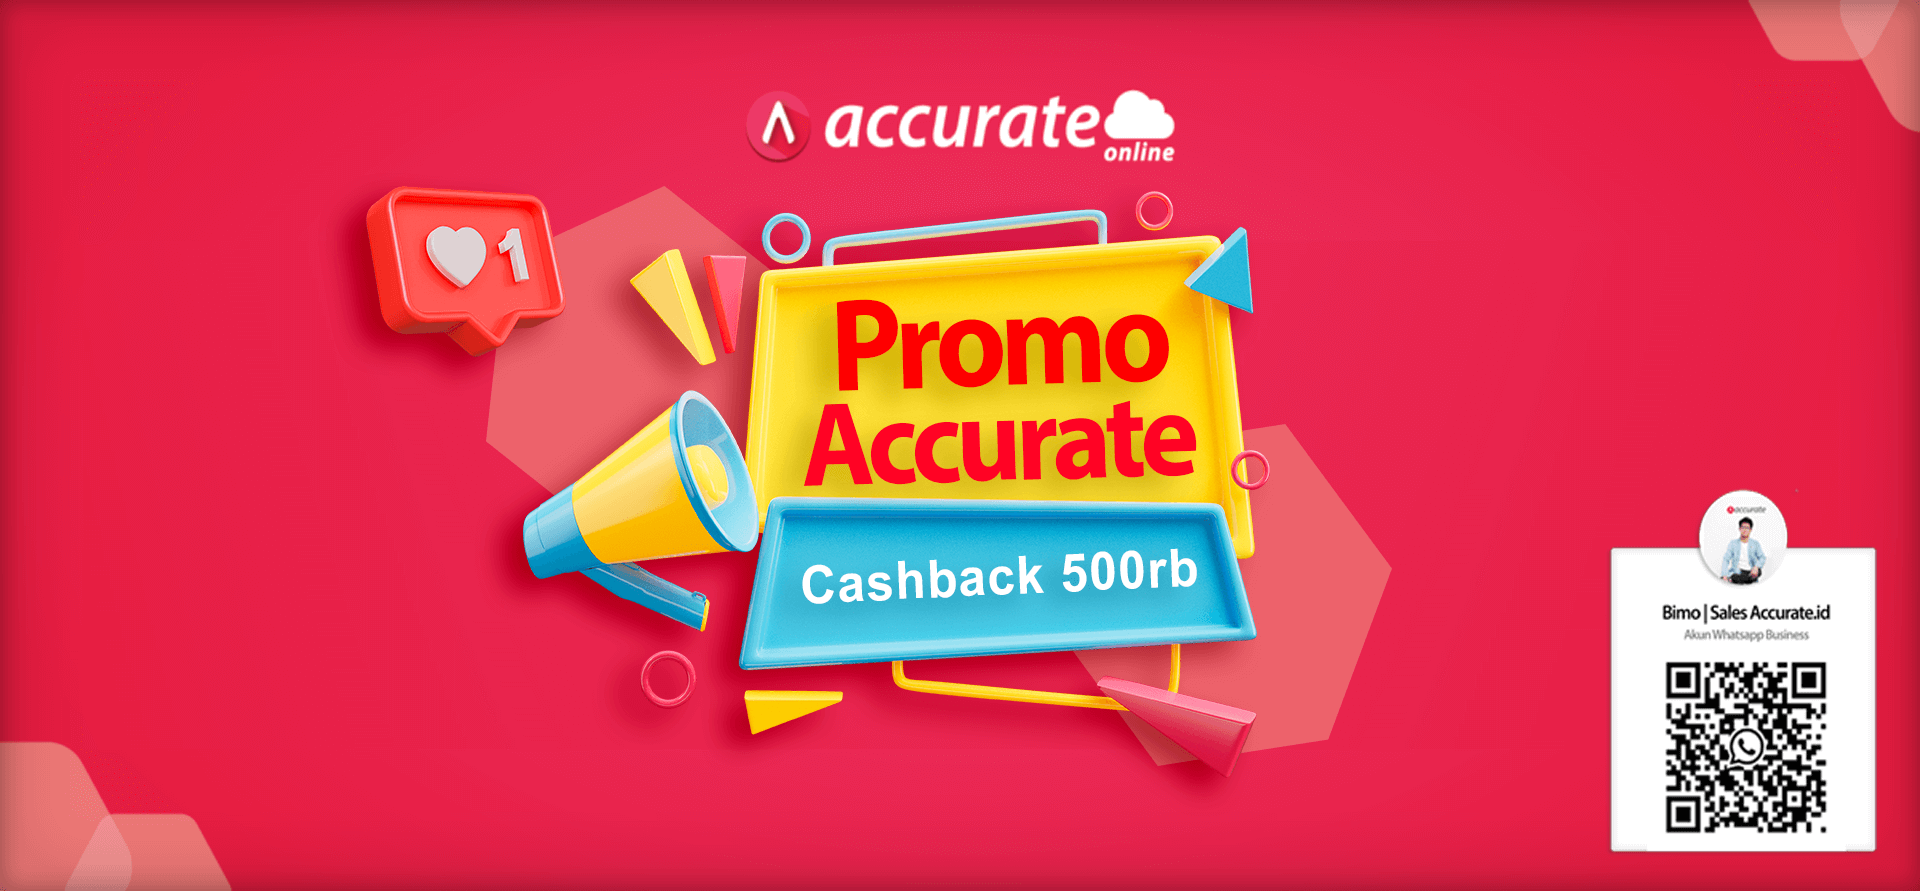 Baner promo accurate online 2